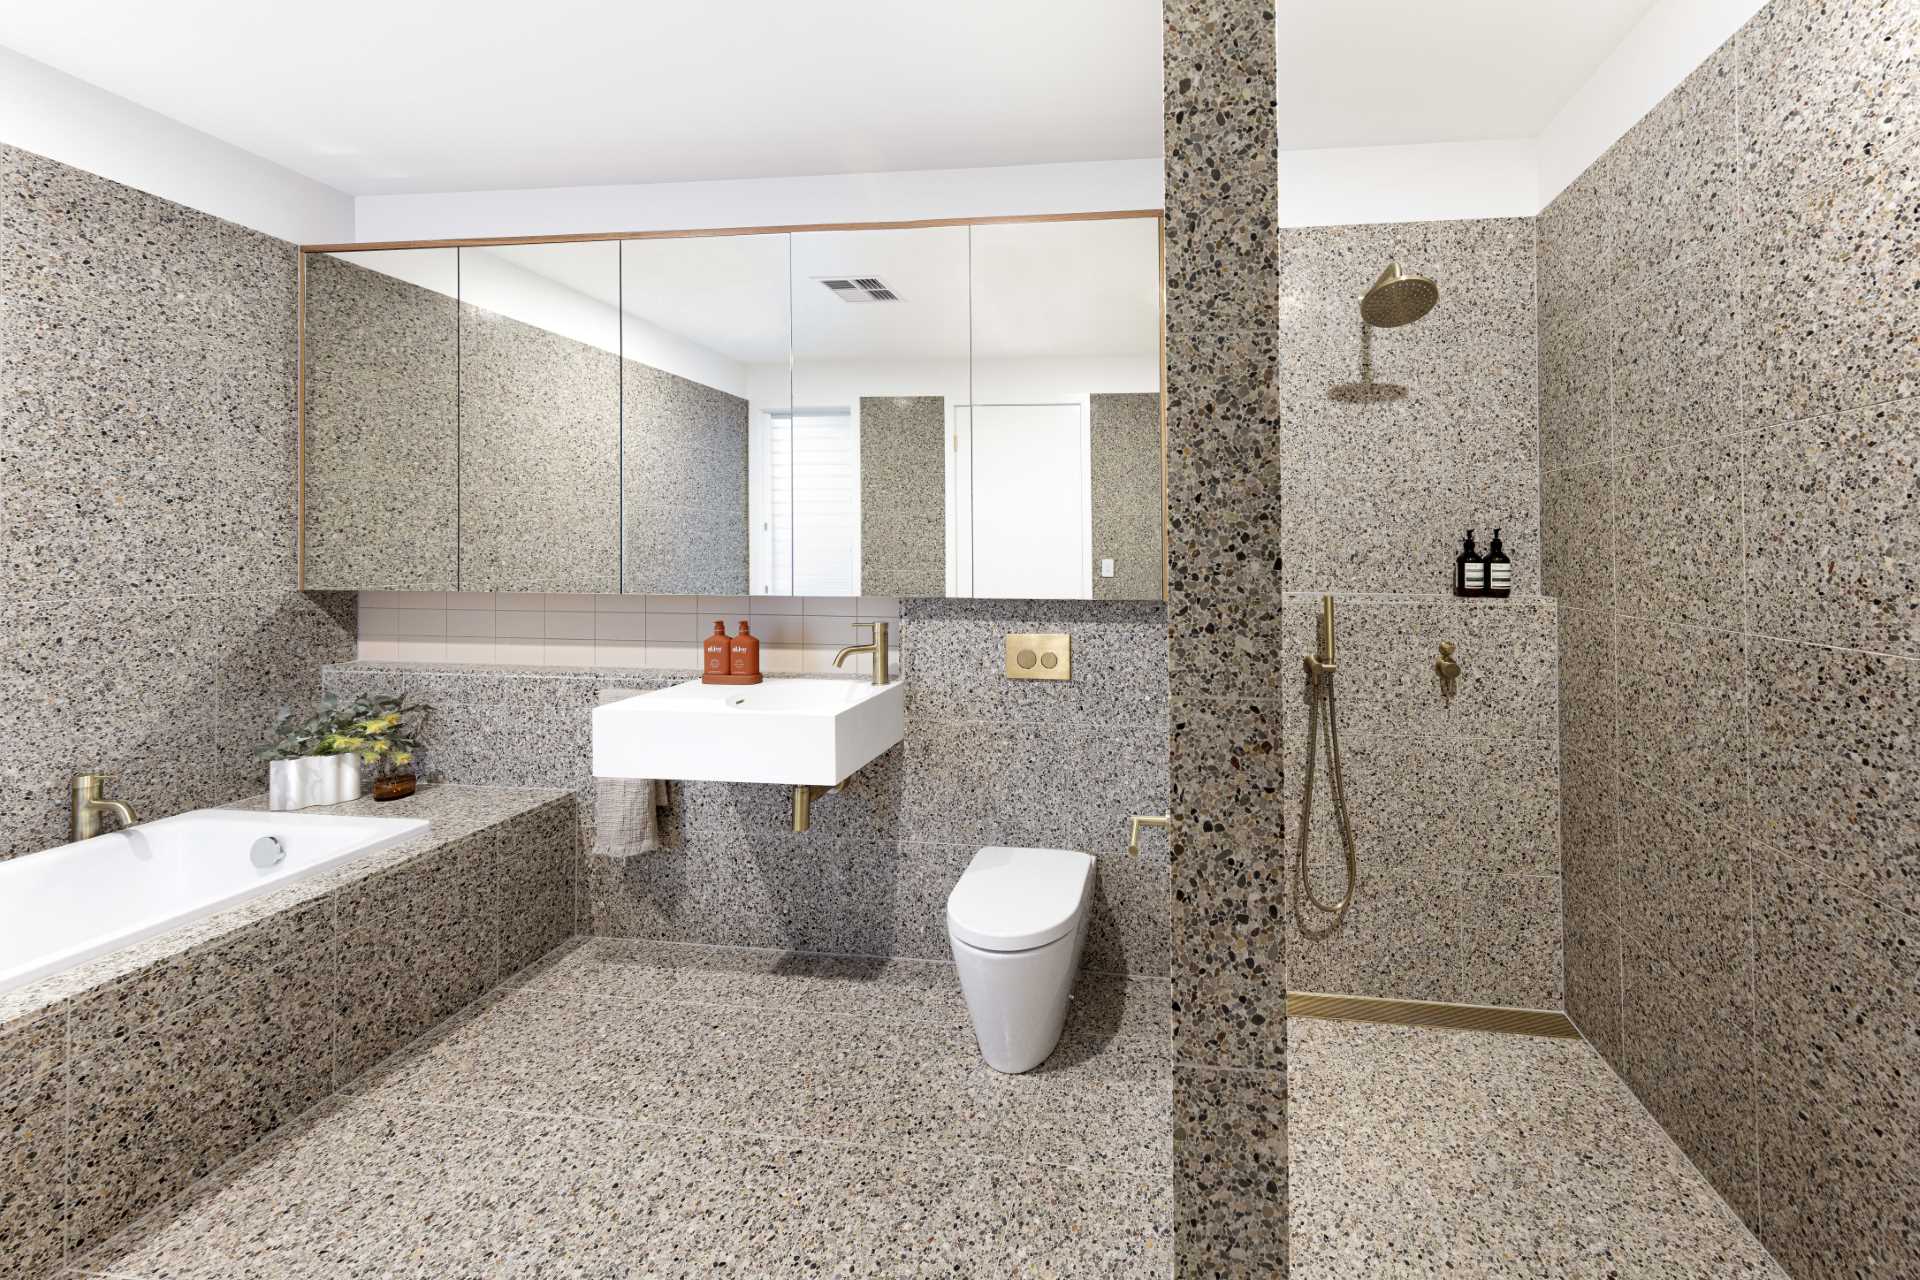 In this primary bathroom, tiles cover the walls and floor, while a built-in bathtub lines the wall and the shower is located behind a solid wall.